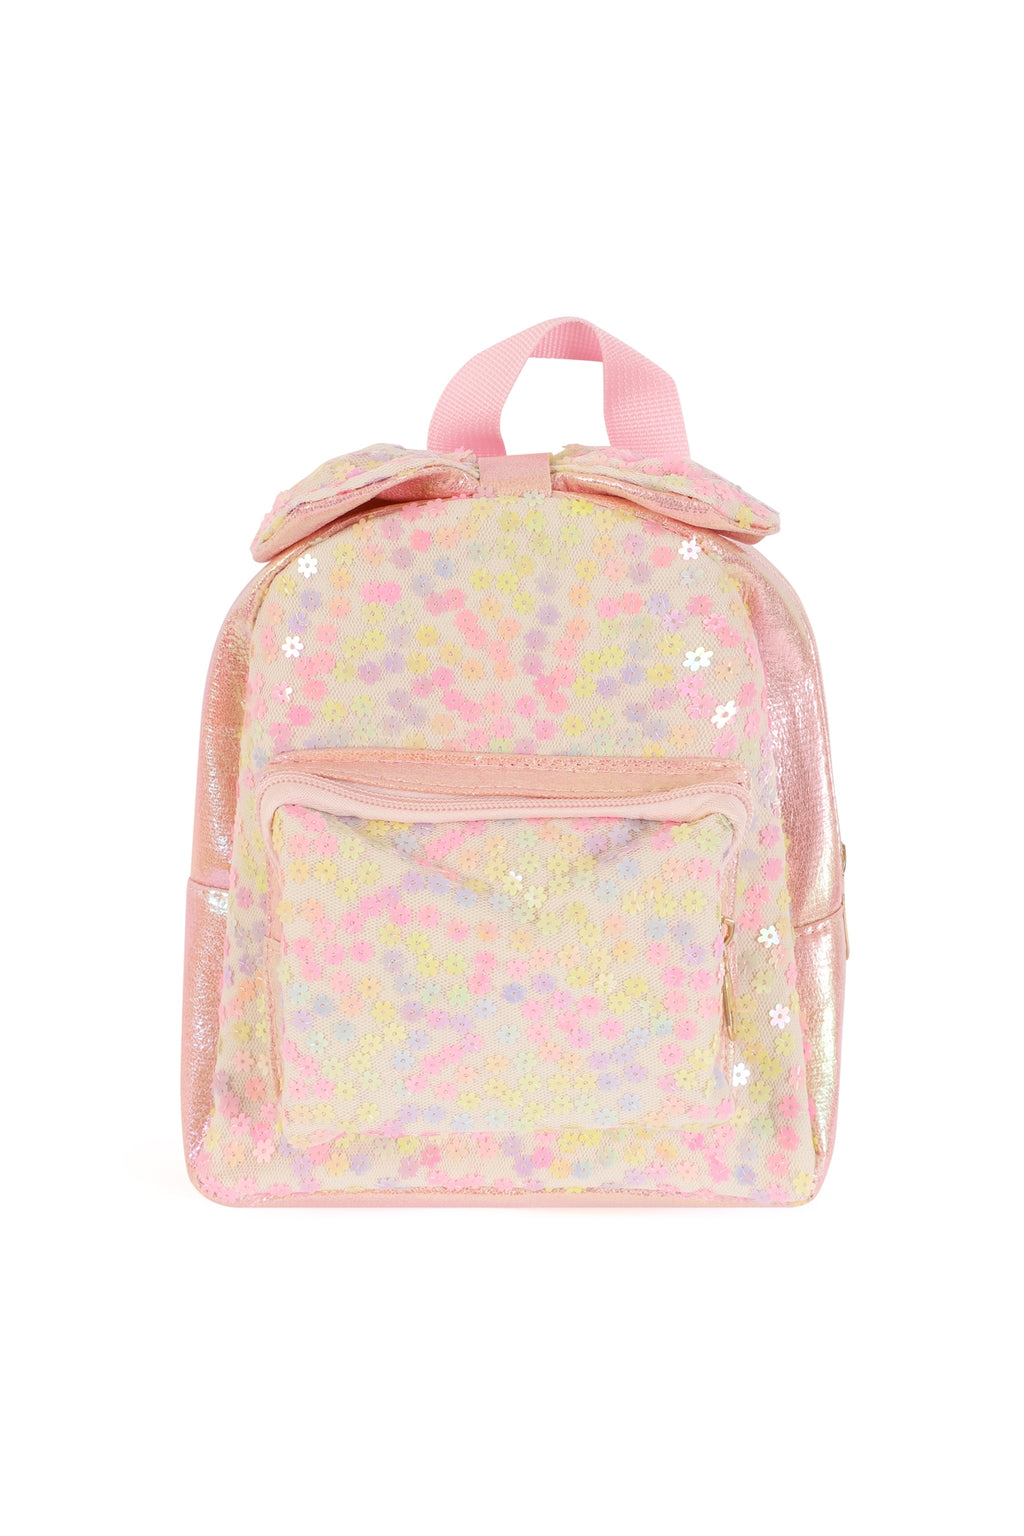 Cute Bow Glitter Kids Backpack Pink - Pack of 6